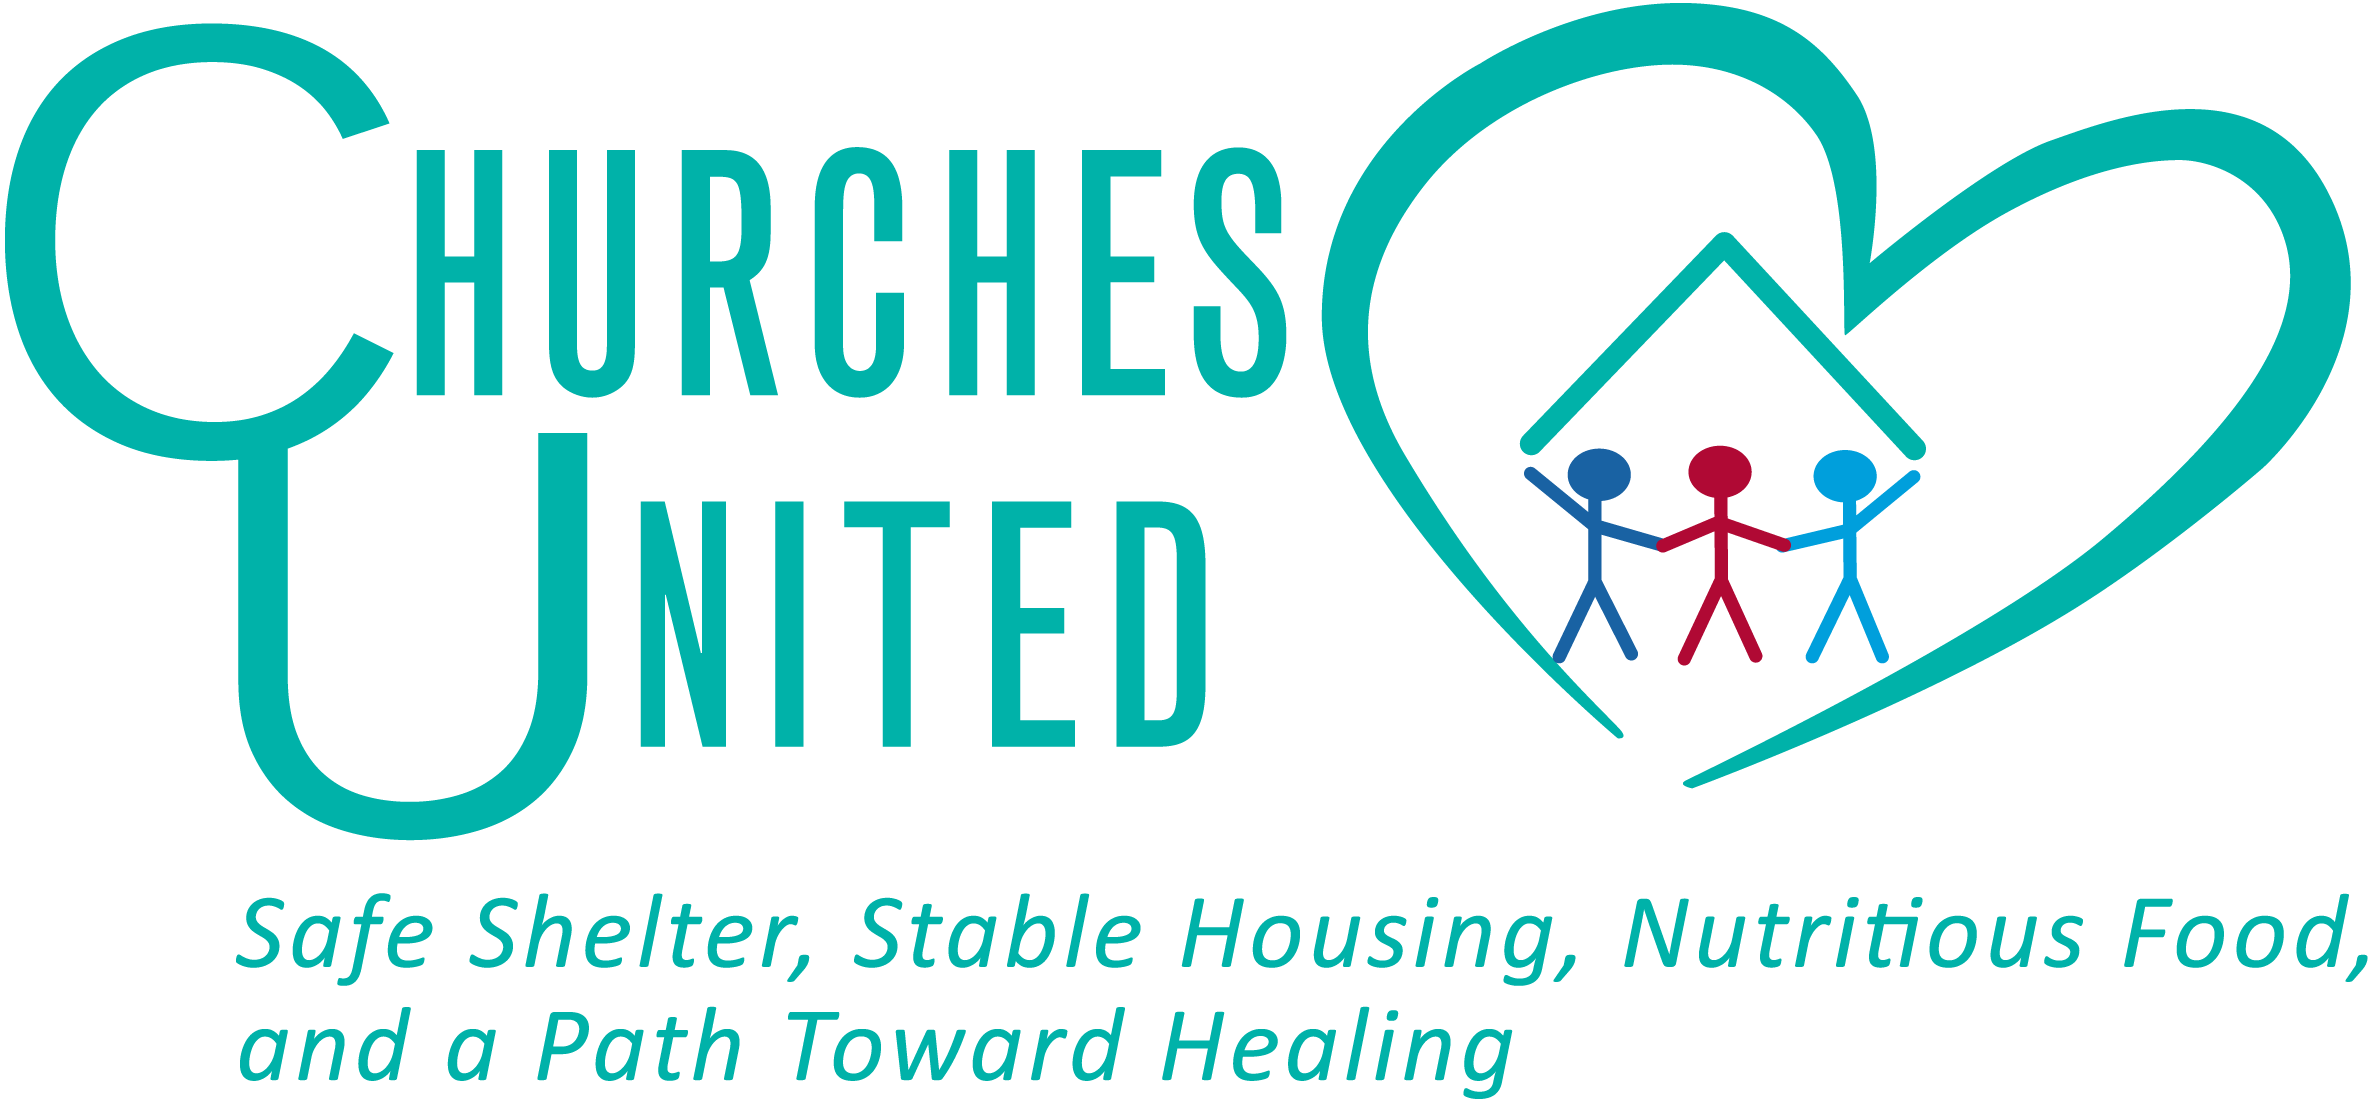 Churches United for the Homeless logo